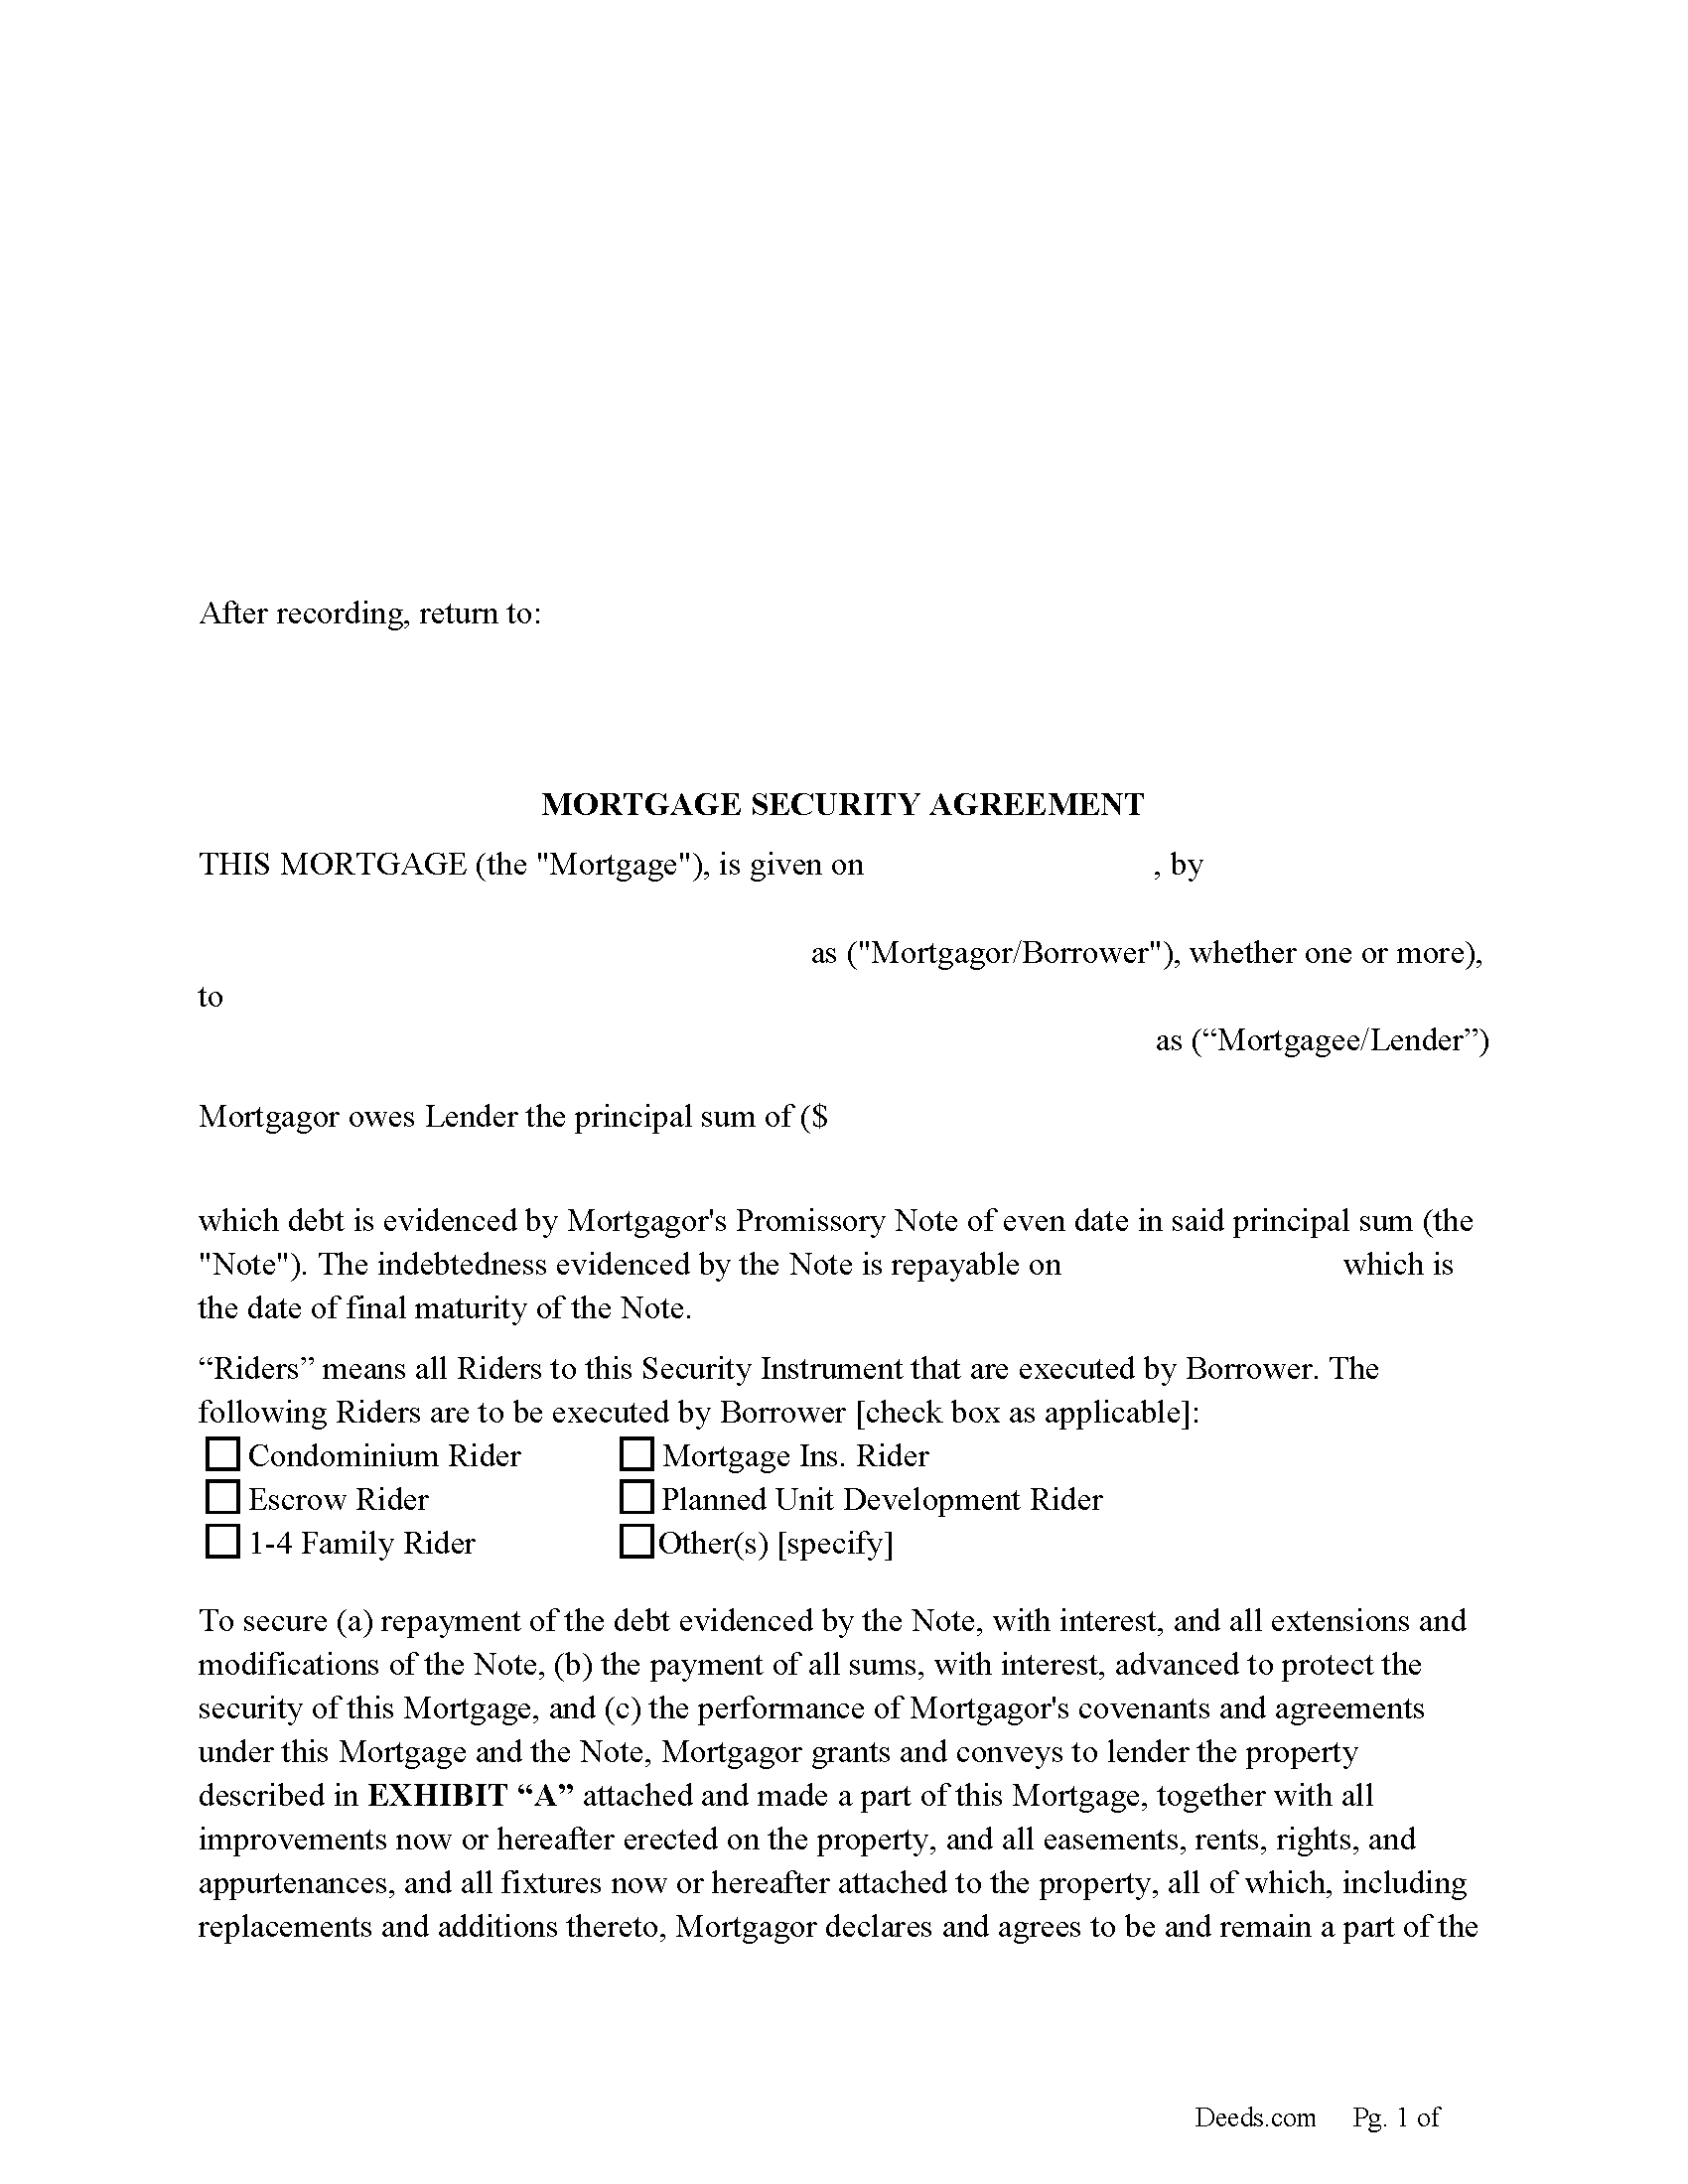 North Dakota Mortgage Security Agreement and Promissory Note Image